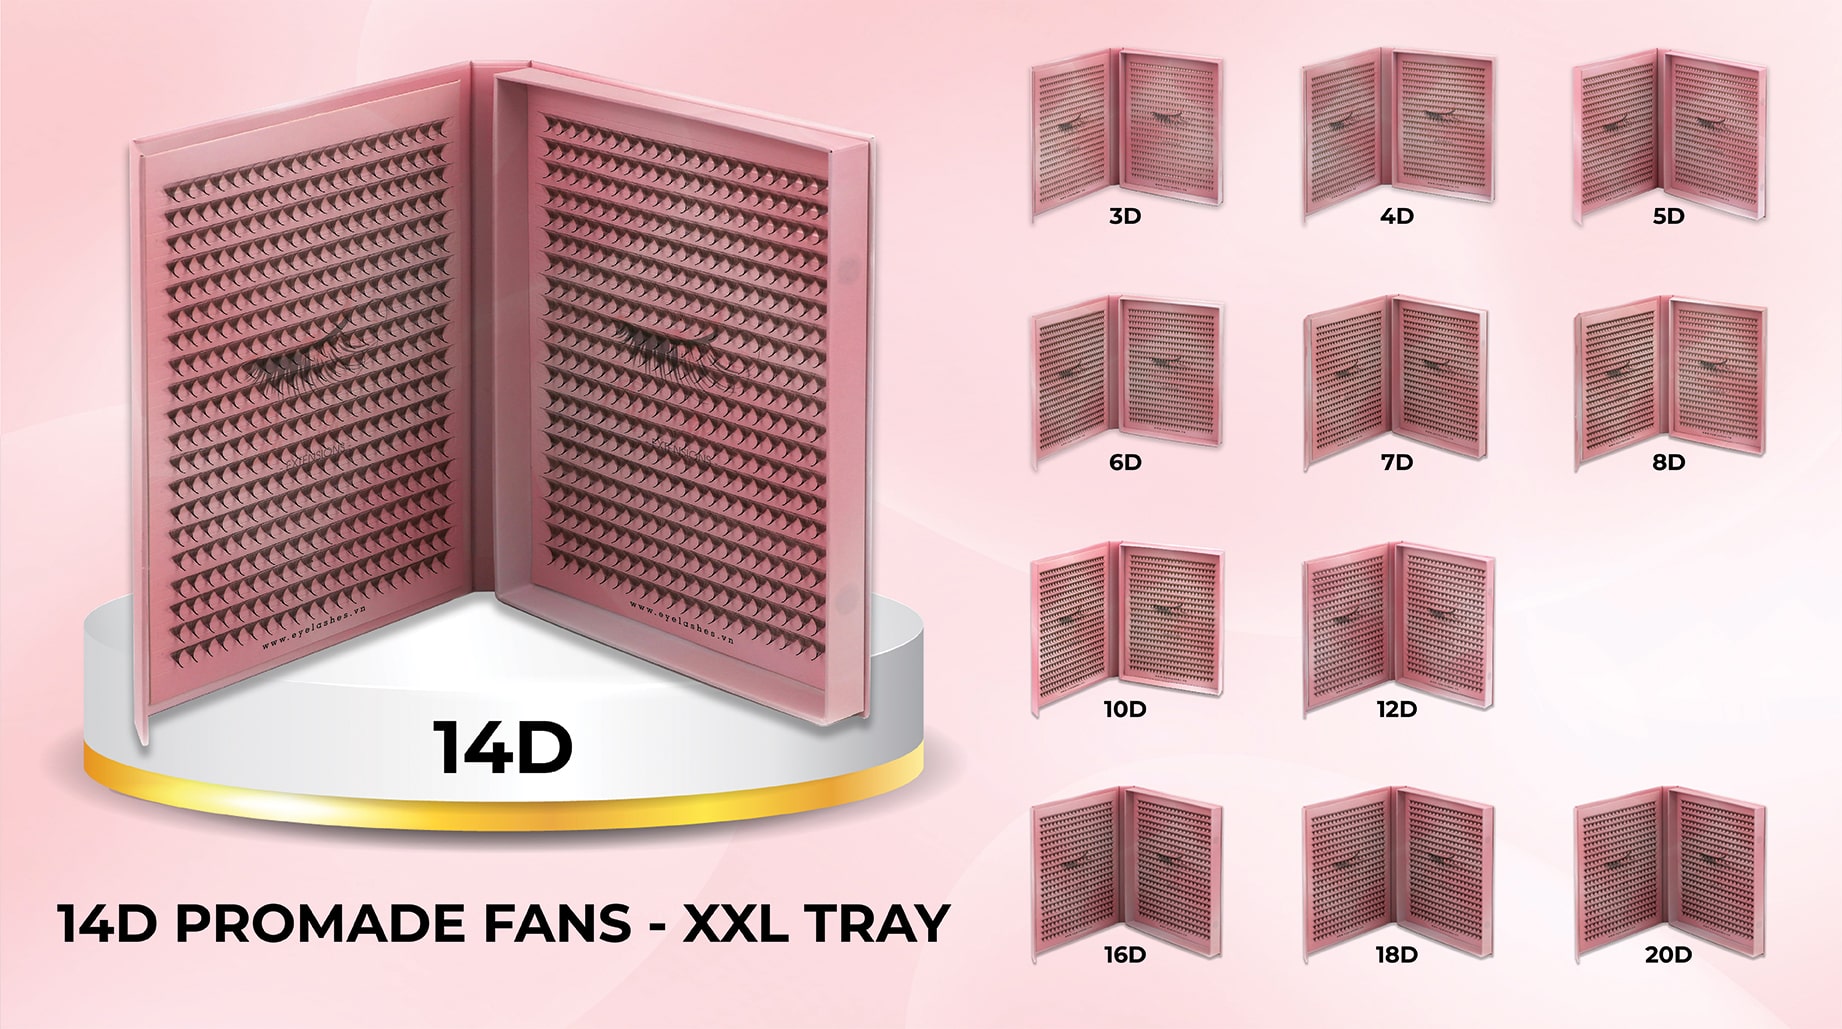 14D-promade-fan-XXL-Tray-wholesale-eyelash-supplier-VNLASHES